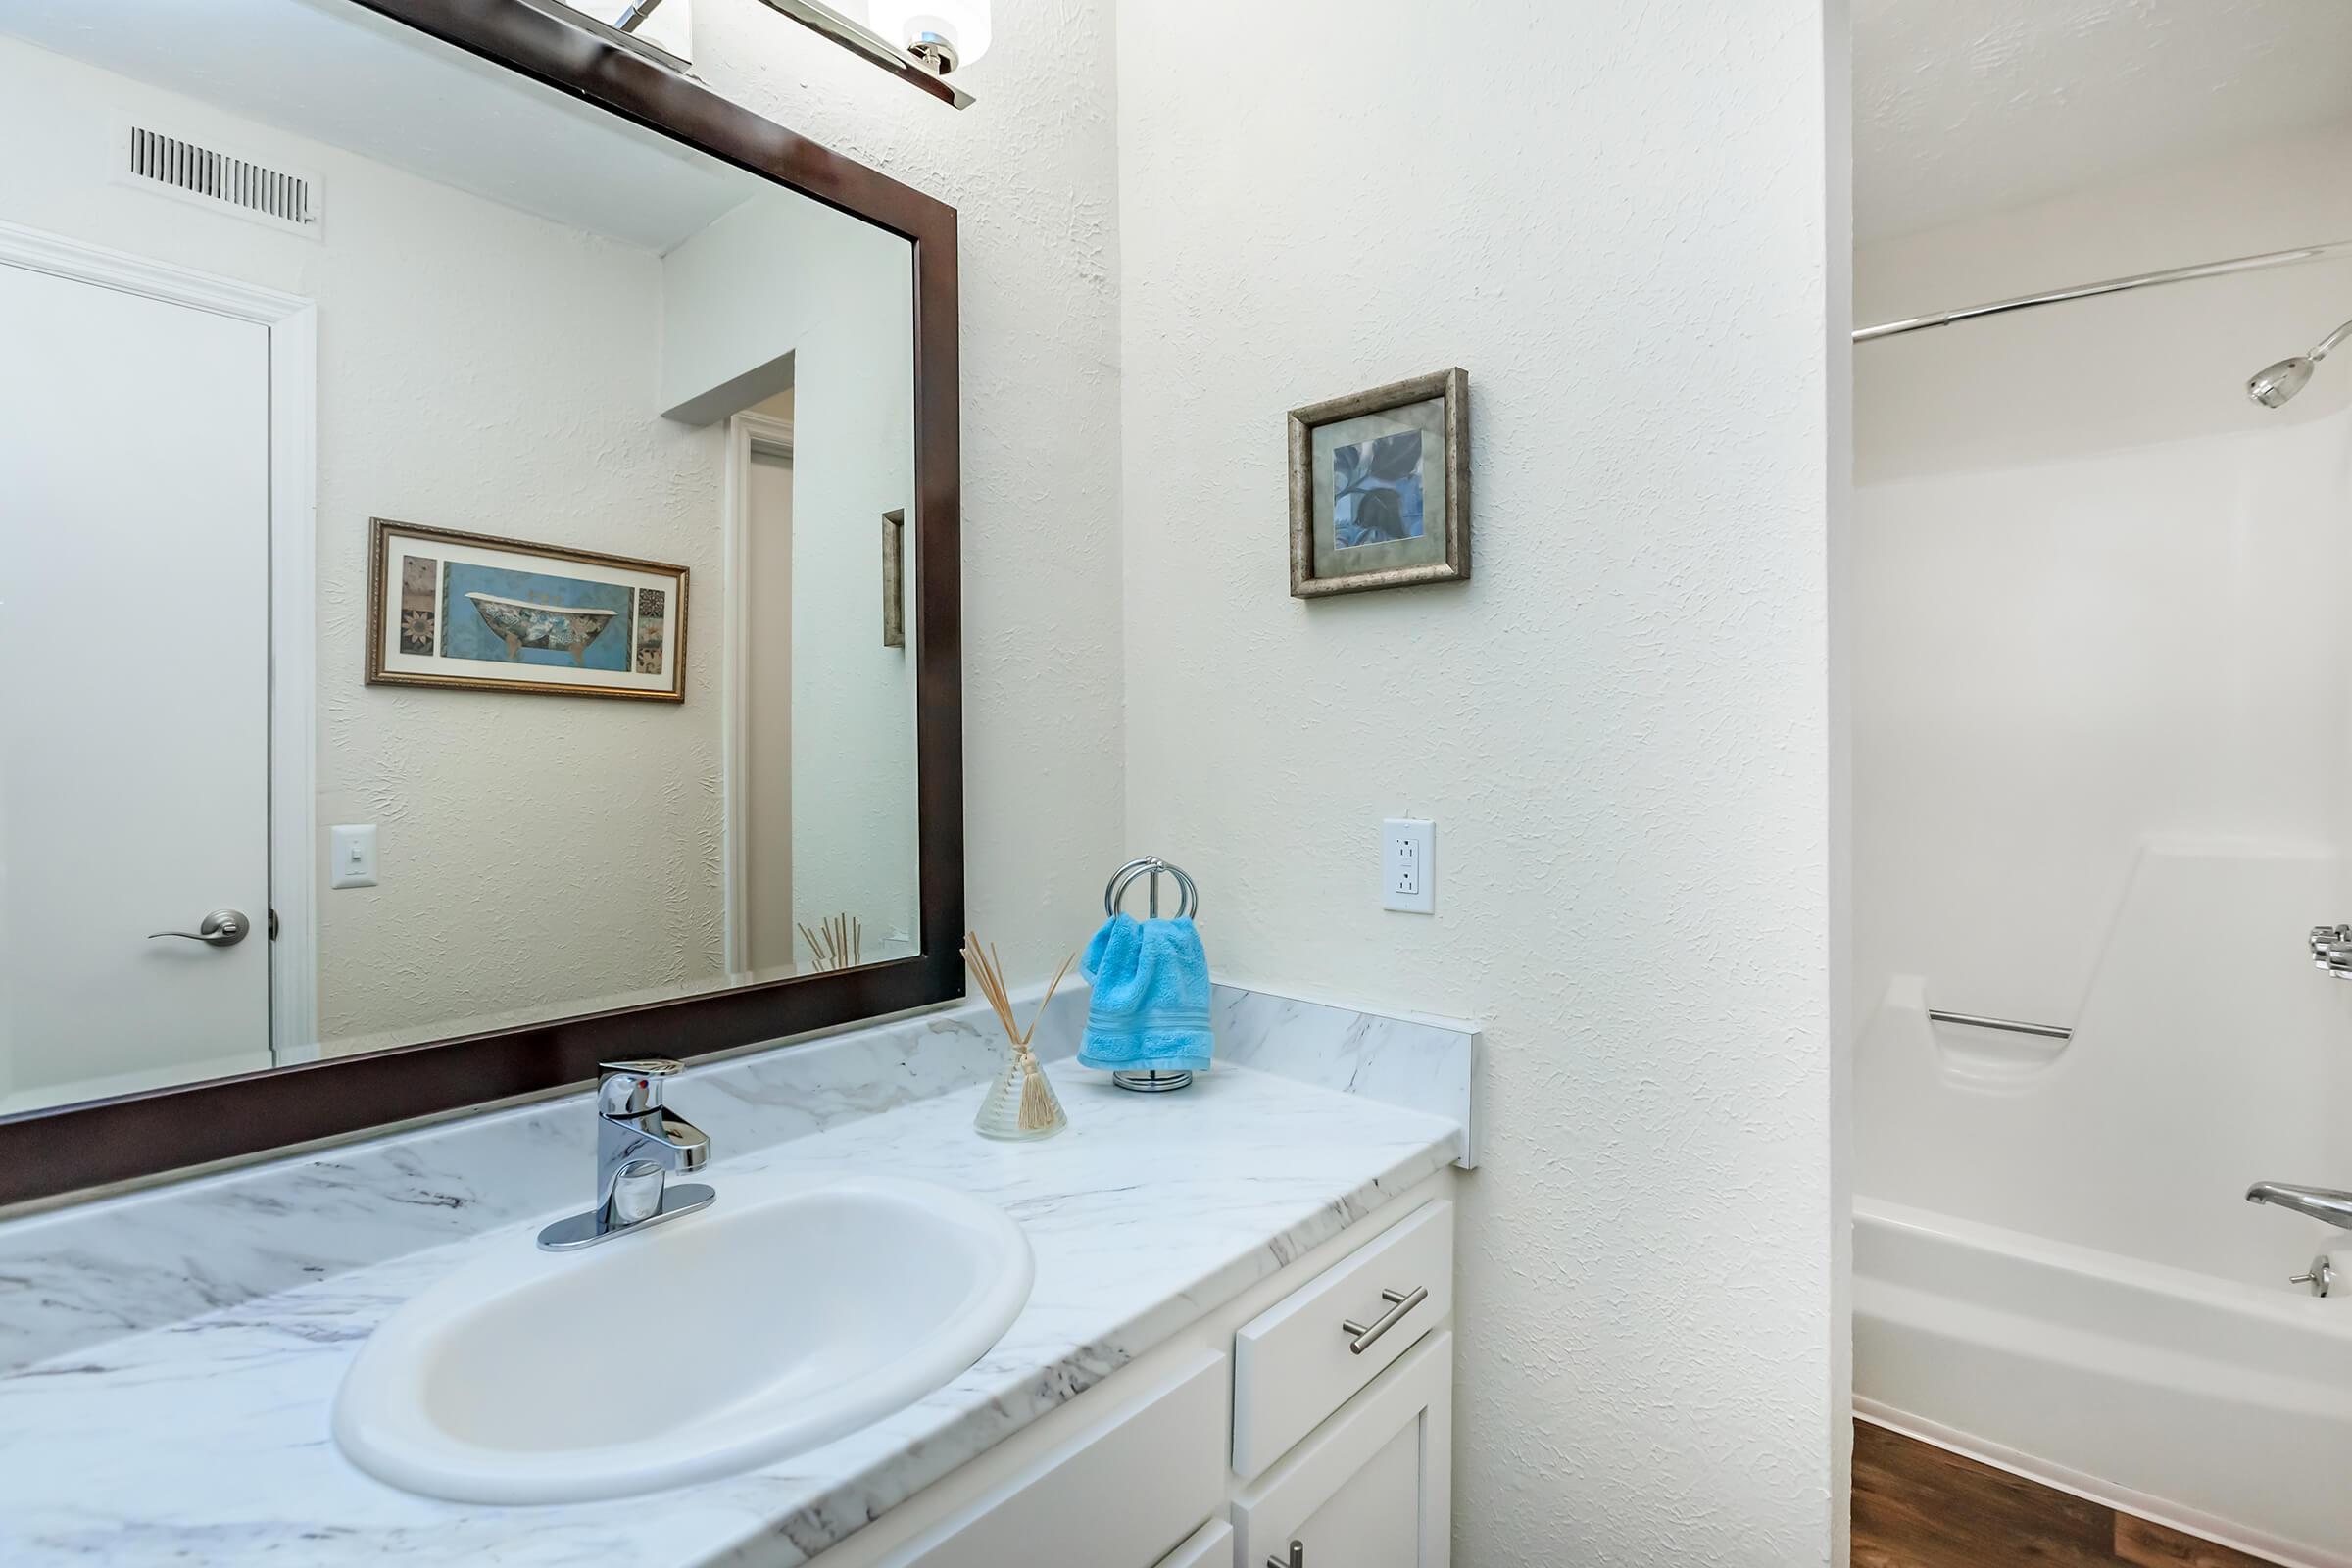 Spacious Bathroom Countertop at Chase Cove Apartments in Nashville, TN